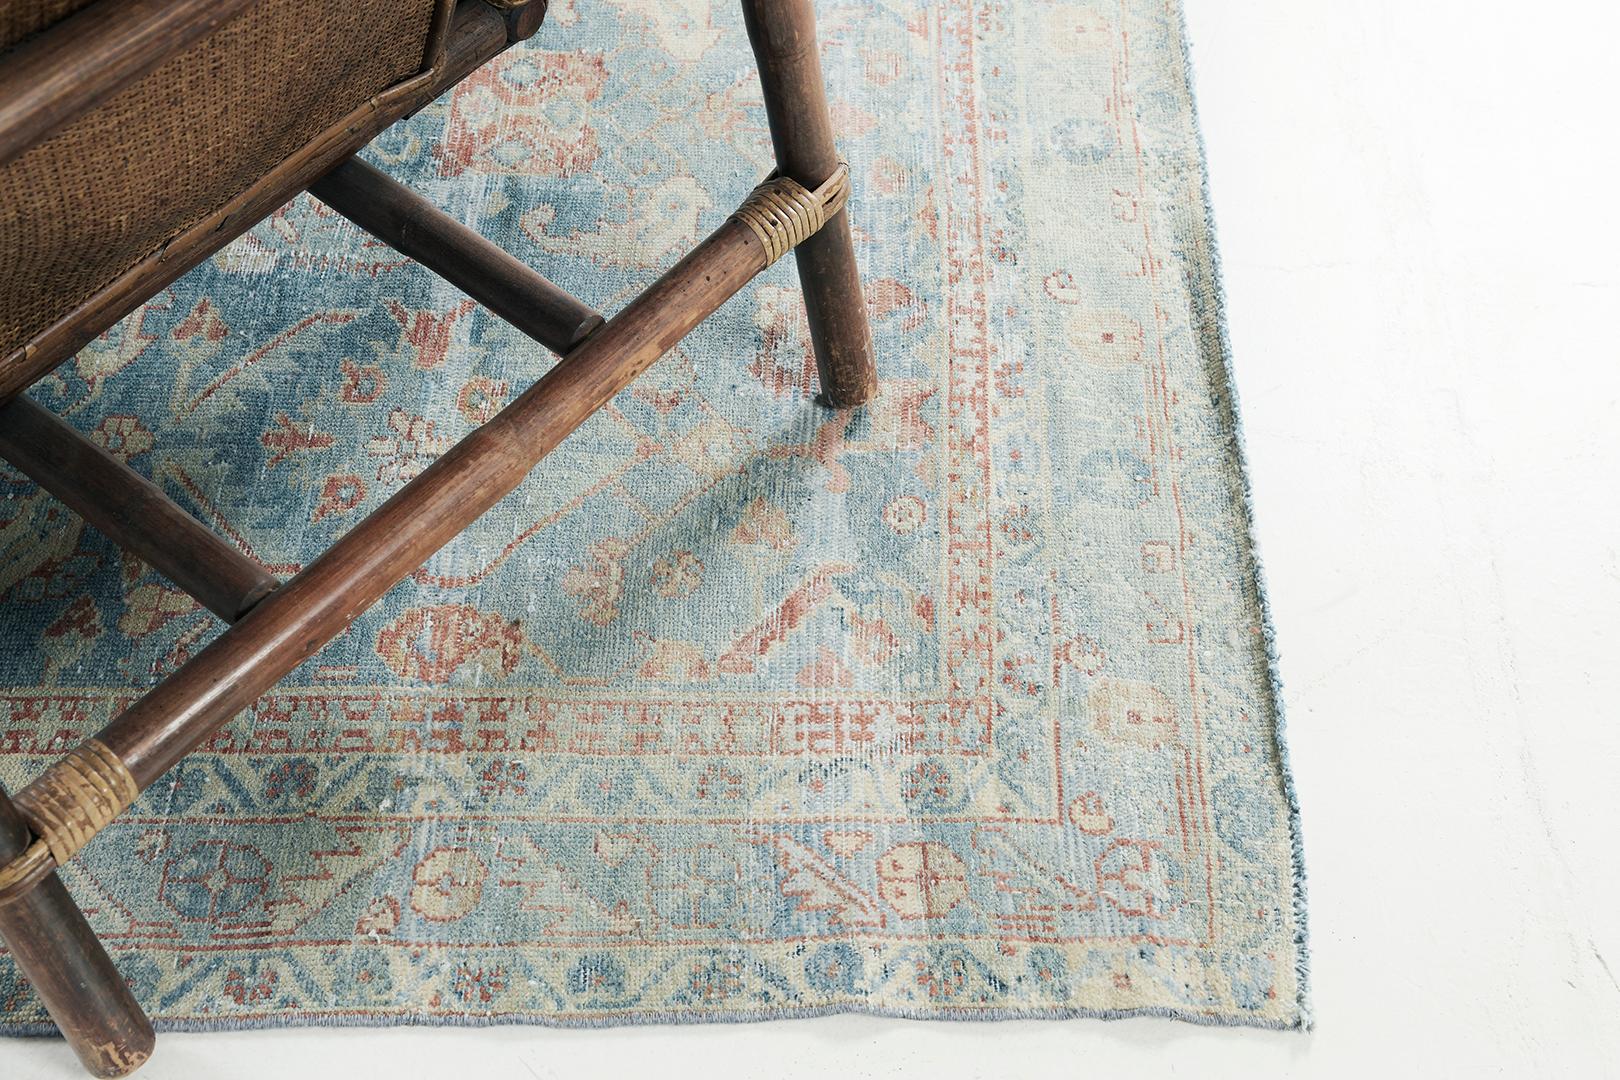 Early 20th Century Antique Persian Malayer Runner 29965 For Sale